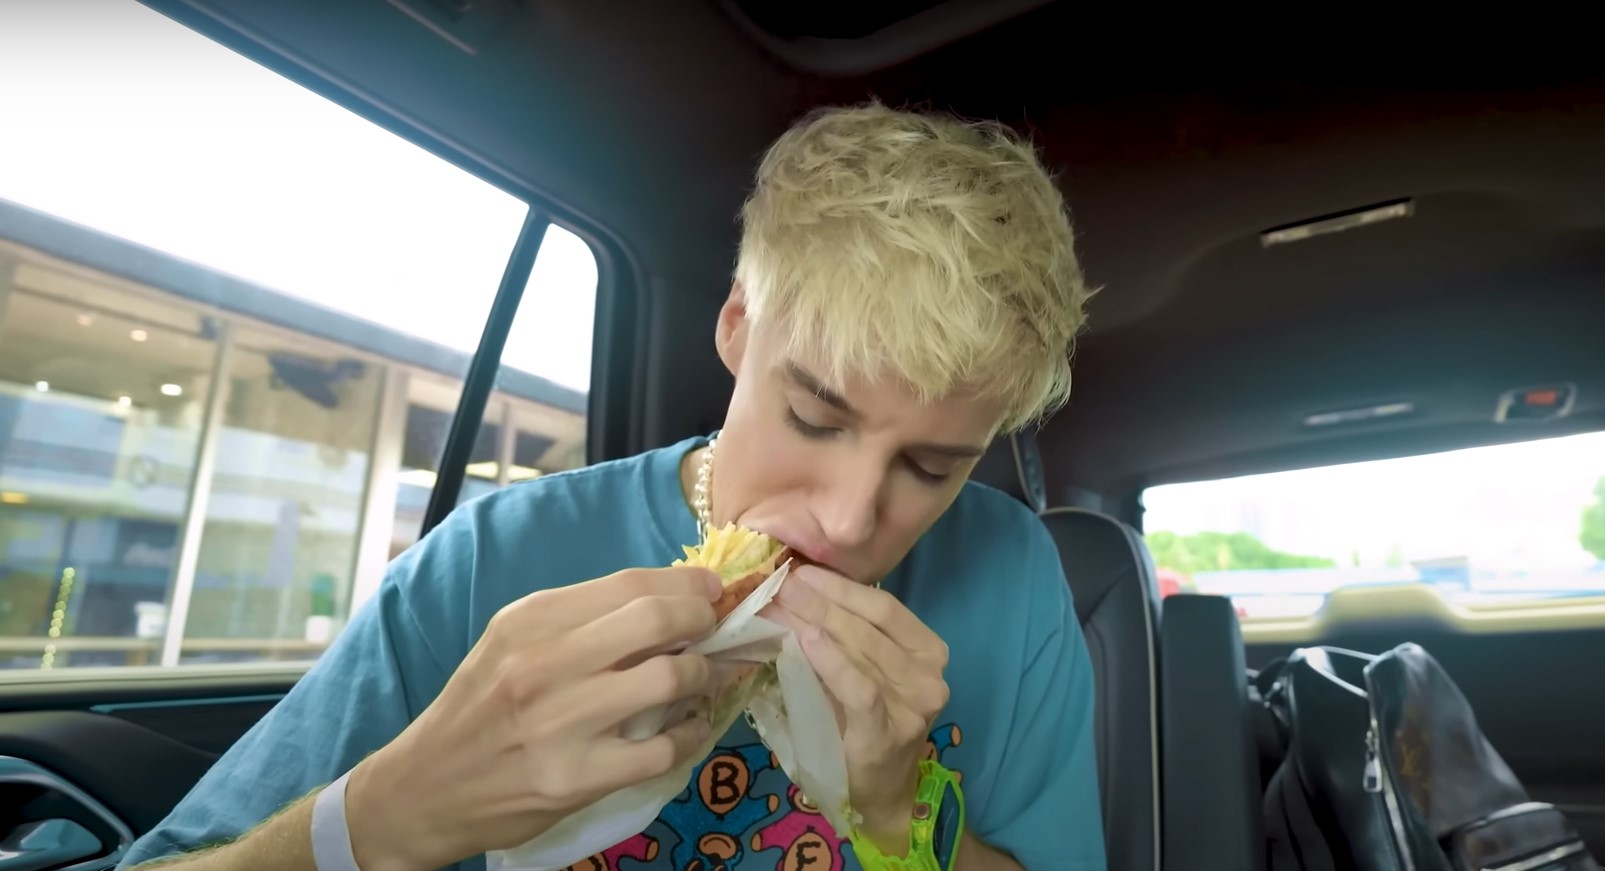 Portuguese Vlogger Raphael Gomes Eats At Miami’s TikTok-Hyped Restaurants For A Day